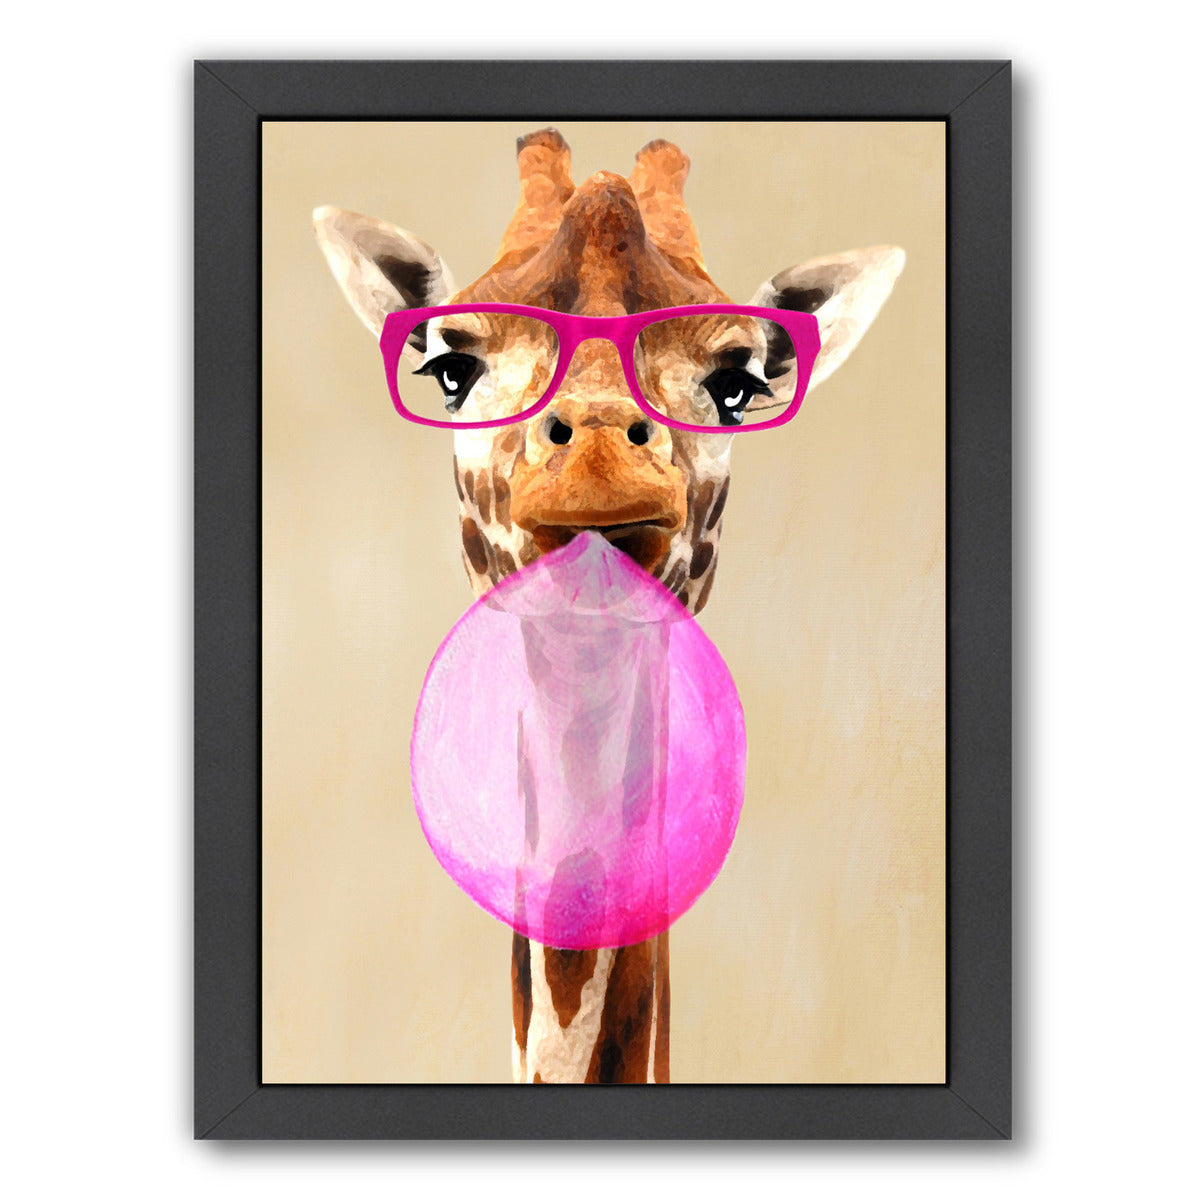 Giraffe With Spectacles And Bubblegum By Coco De Paris - Black Framed Print - Wall Art - Americanflat